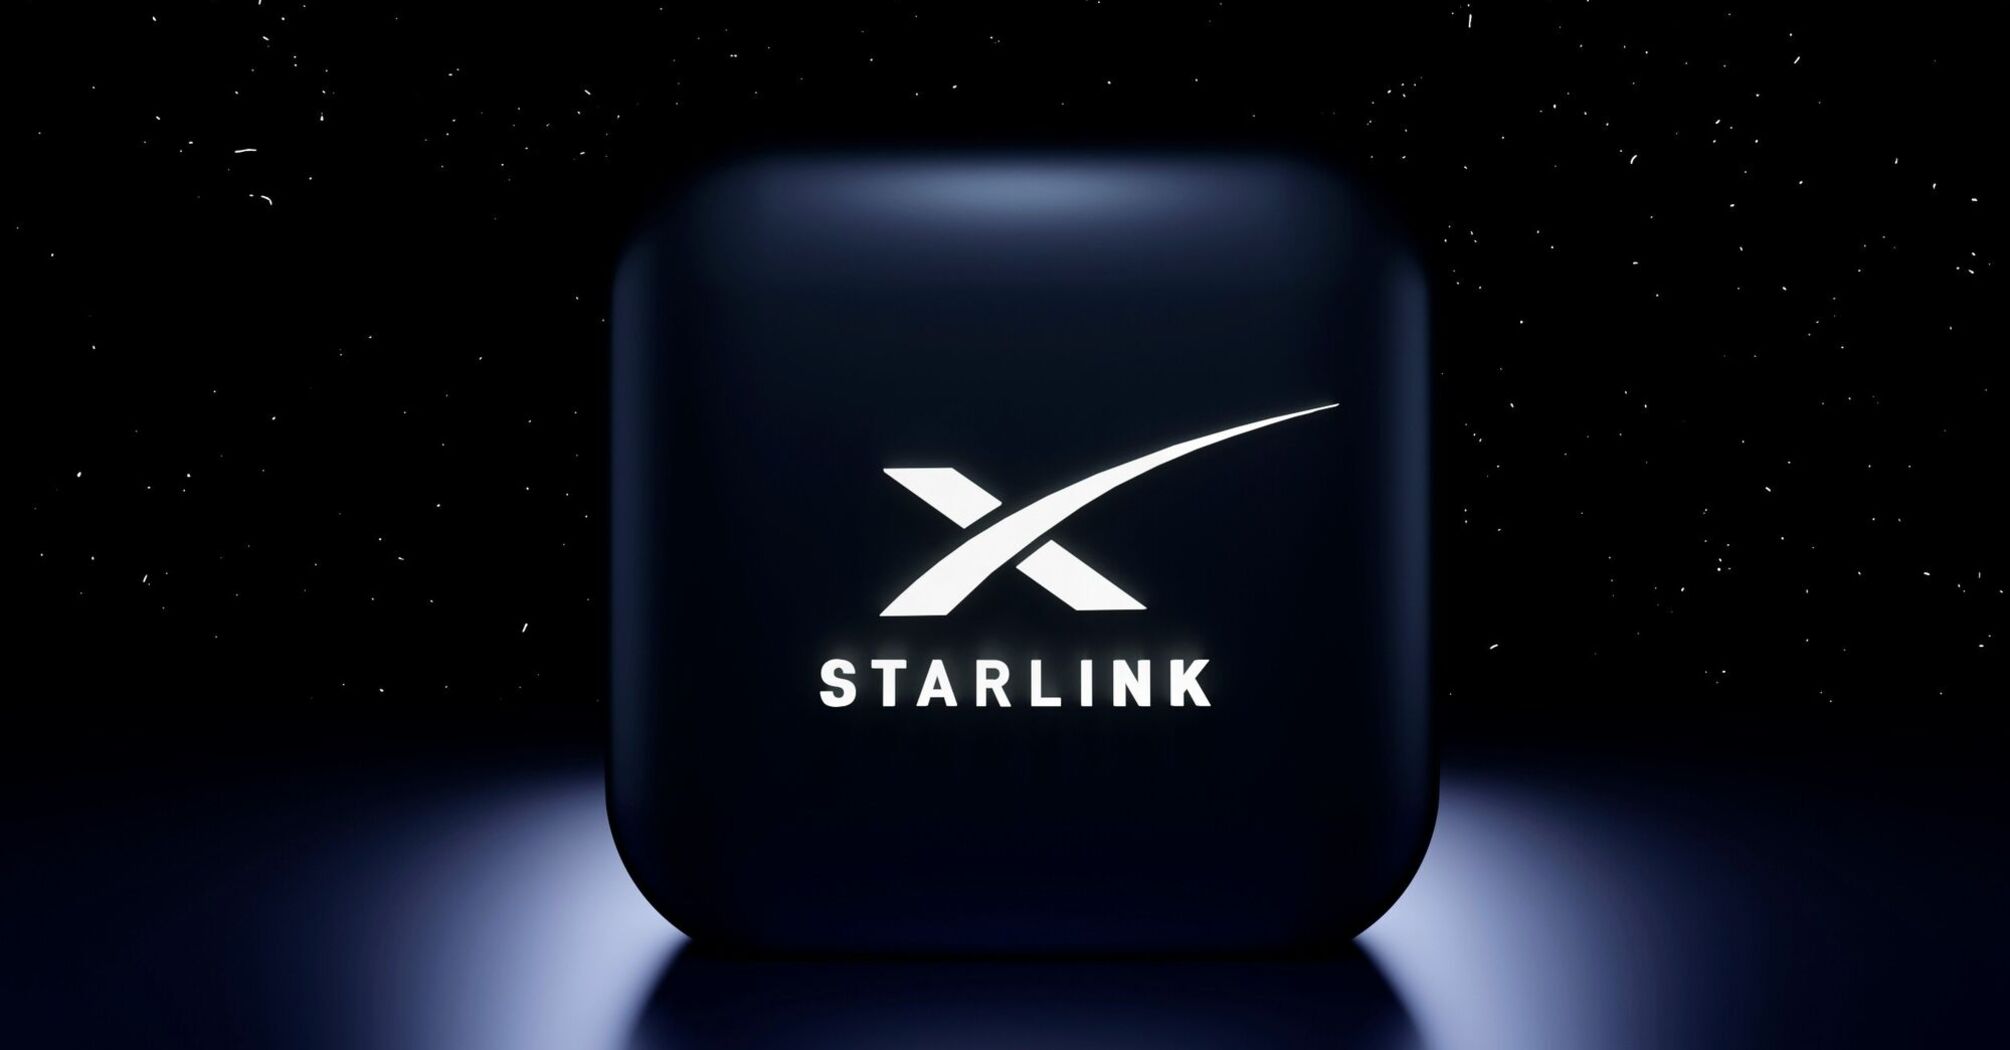 Starlink logo against a starry night sky background